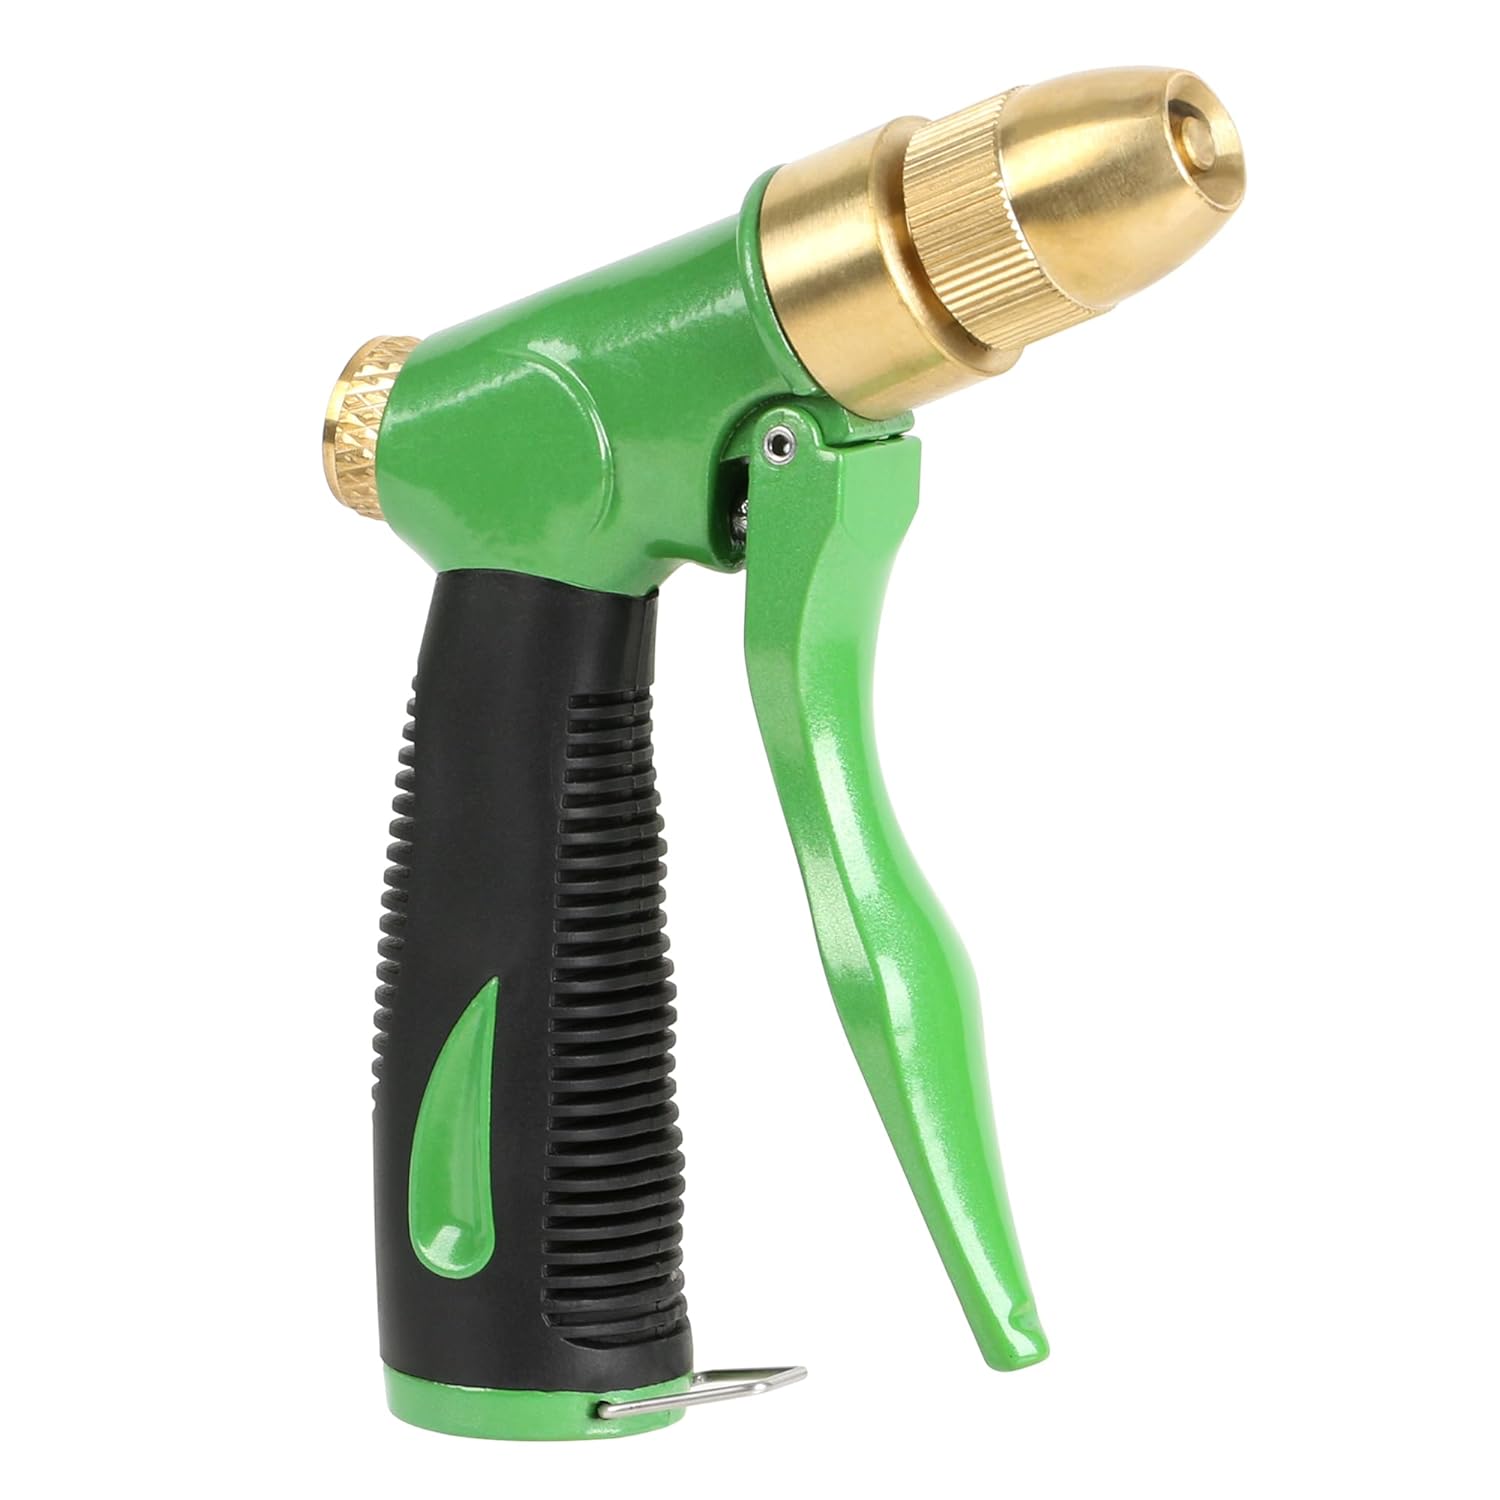 STYDDI Heavy Duty All Metal Adjustable Garden Hose Nozzle, Heavyweight Front-Trigger Adjustable Watering Nozzle, High Pressure Multifunction Hose Nozzle for Plants and Lawn, Car Washing, Patio and Pet